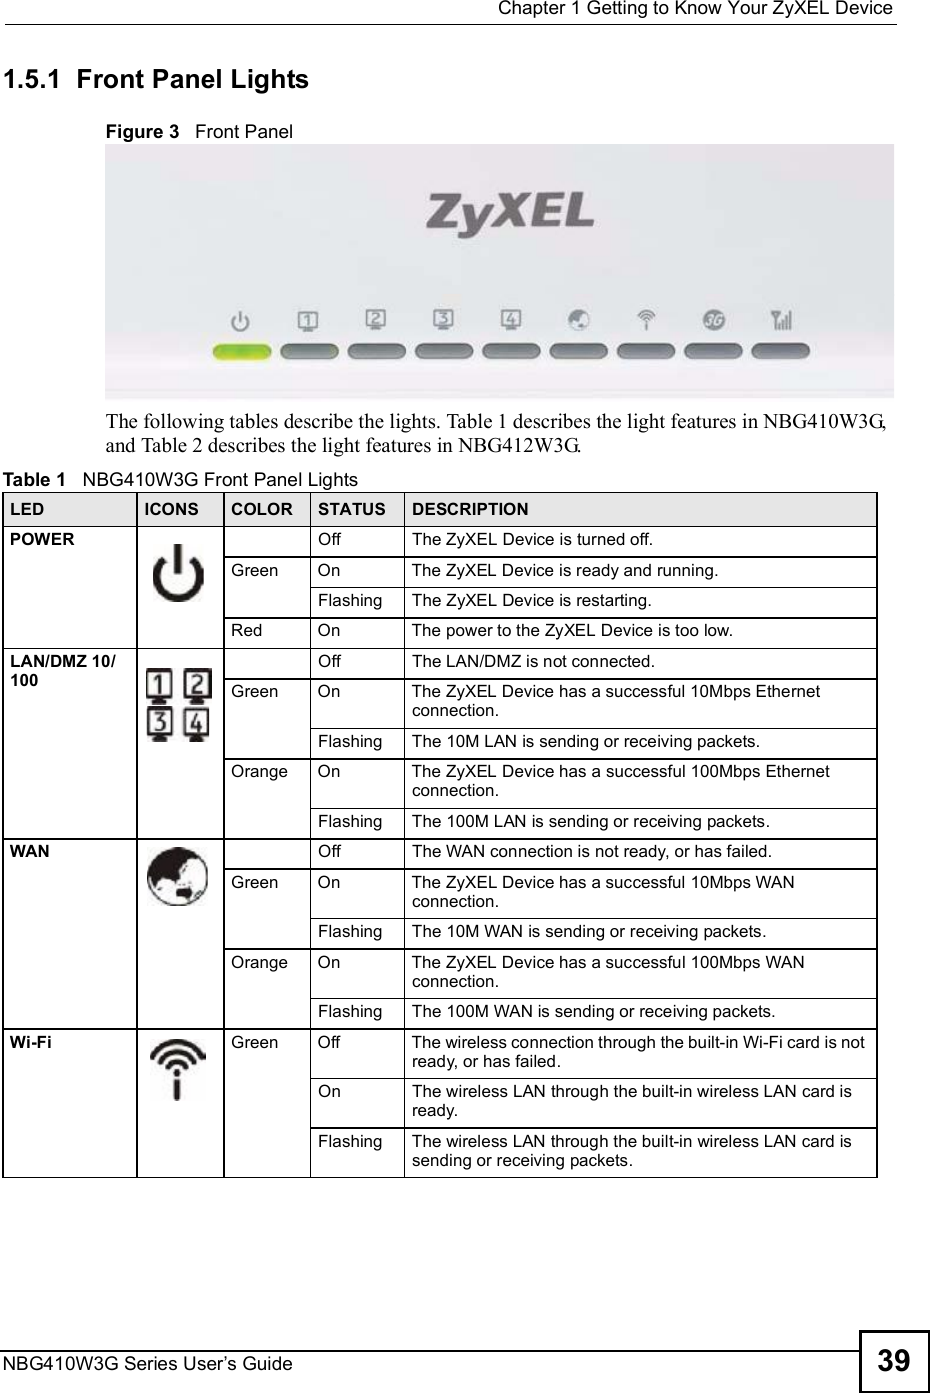  Chapter 1Getting to Know Your ZyXEL DeviceNBG410W3G Series User s Guide 391.5.1  Front Panel LightsFigure 3   Front PanelThe following tables describe the lights. Table 1 describes the light features in NBG410W3G, and Table 2 describes the light features in NBG412W3G.Table 1   NBG410W3G Front Panel LightsLED ICONS COLOR STATUS DESCRIPTIONPOWER OffThe ZyXEL Device is turned off.GreenOnThe ZyXEL Device is ready and running.FlashingThe ZyXEL Device is restarting.RedOnThe power to the ZyXEL Device is too low.LAN/DMZ 10/100OffThe LAN/DMZ is not connected.GreenOnThe ZyXEL Device has a successful 10Mbps Ethernet connection.FlashingThe 10M LAN is sending or receiving packets.OrangeOnThe ZyXEL Device has a successful 100Mbps Ethernet connection.FlashingThe 100M LAN is sending or receiving packets.WAN  OffThe WAN connection is not ready, or has failed.GreenOnThe ZyXEL Device has a successful 10Mbps WAN connection.FlashingThe 10M WAN is sending or receiving packets.OrangeOnThe ZyXEL Device has a successful 100Mbps WAN connection.FlashingThe 100M WAN is sending or receiving packets.Wi-Fi GreenOffThe wireless connection through the built-in Wi-Fi card is not ready, or has failed.OnThe wireless LAN through the built-in wireless LAN card is ready.FlashingThe wireless LAN through the built-in wireless LAN card is sending or receiving packets.